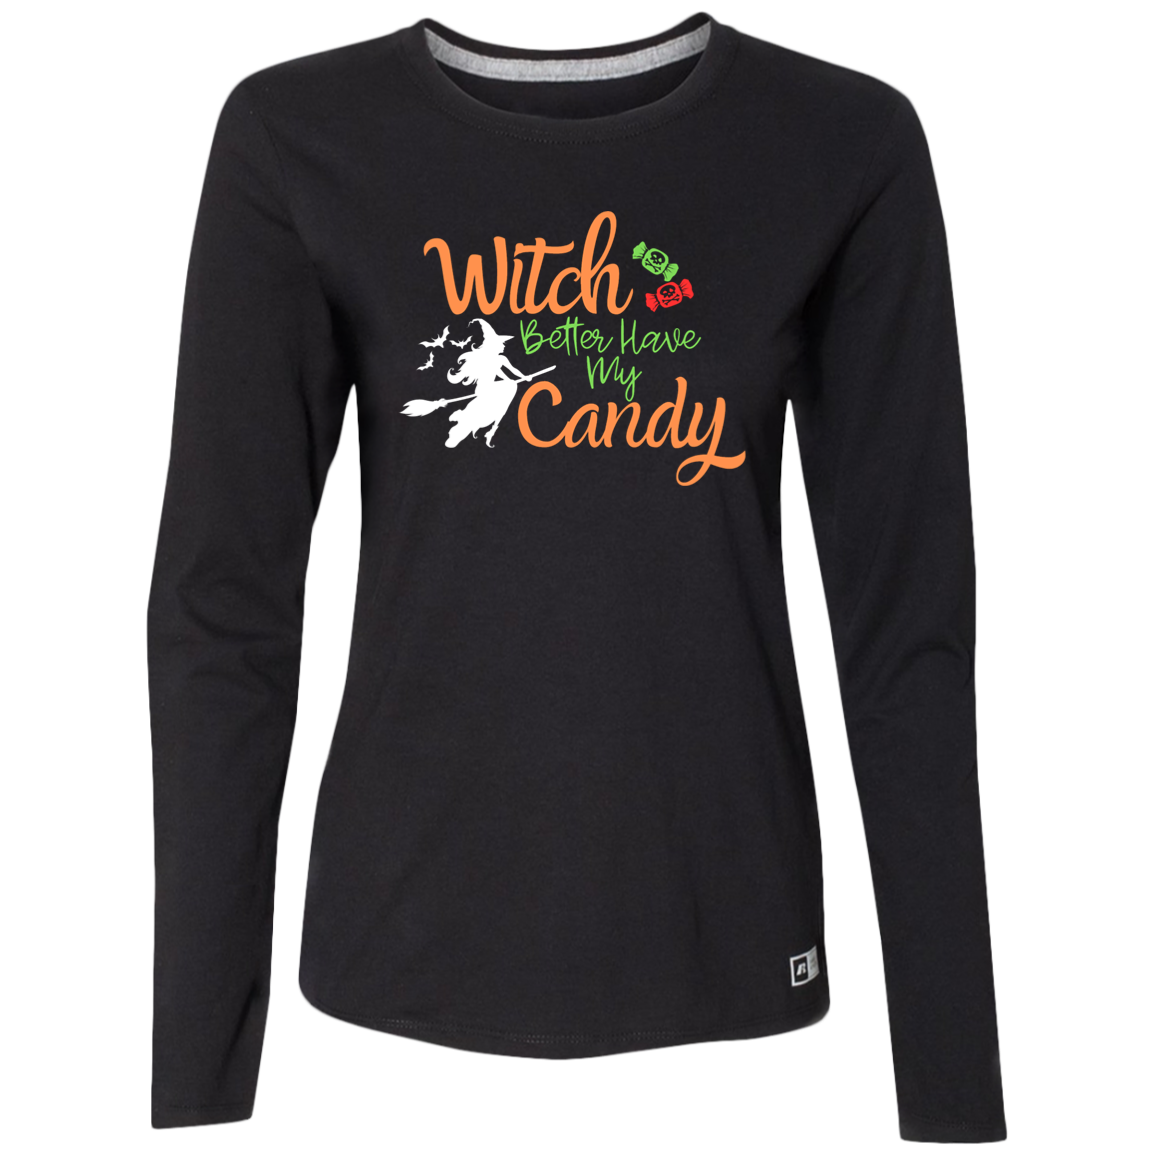 Fun Ladies' Long Sleeve Halloween Tee - Witch Better Have My Candy - black